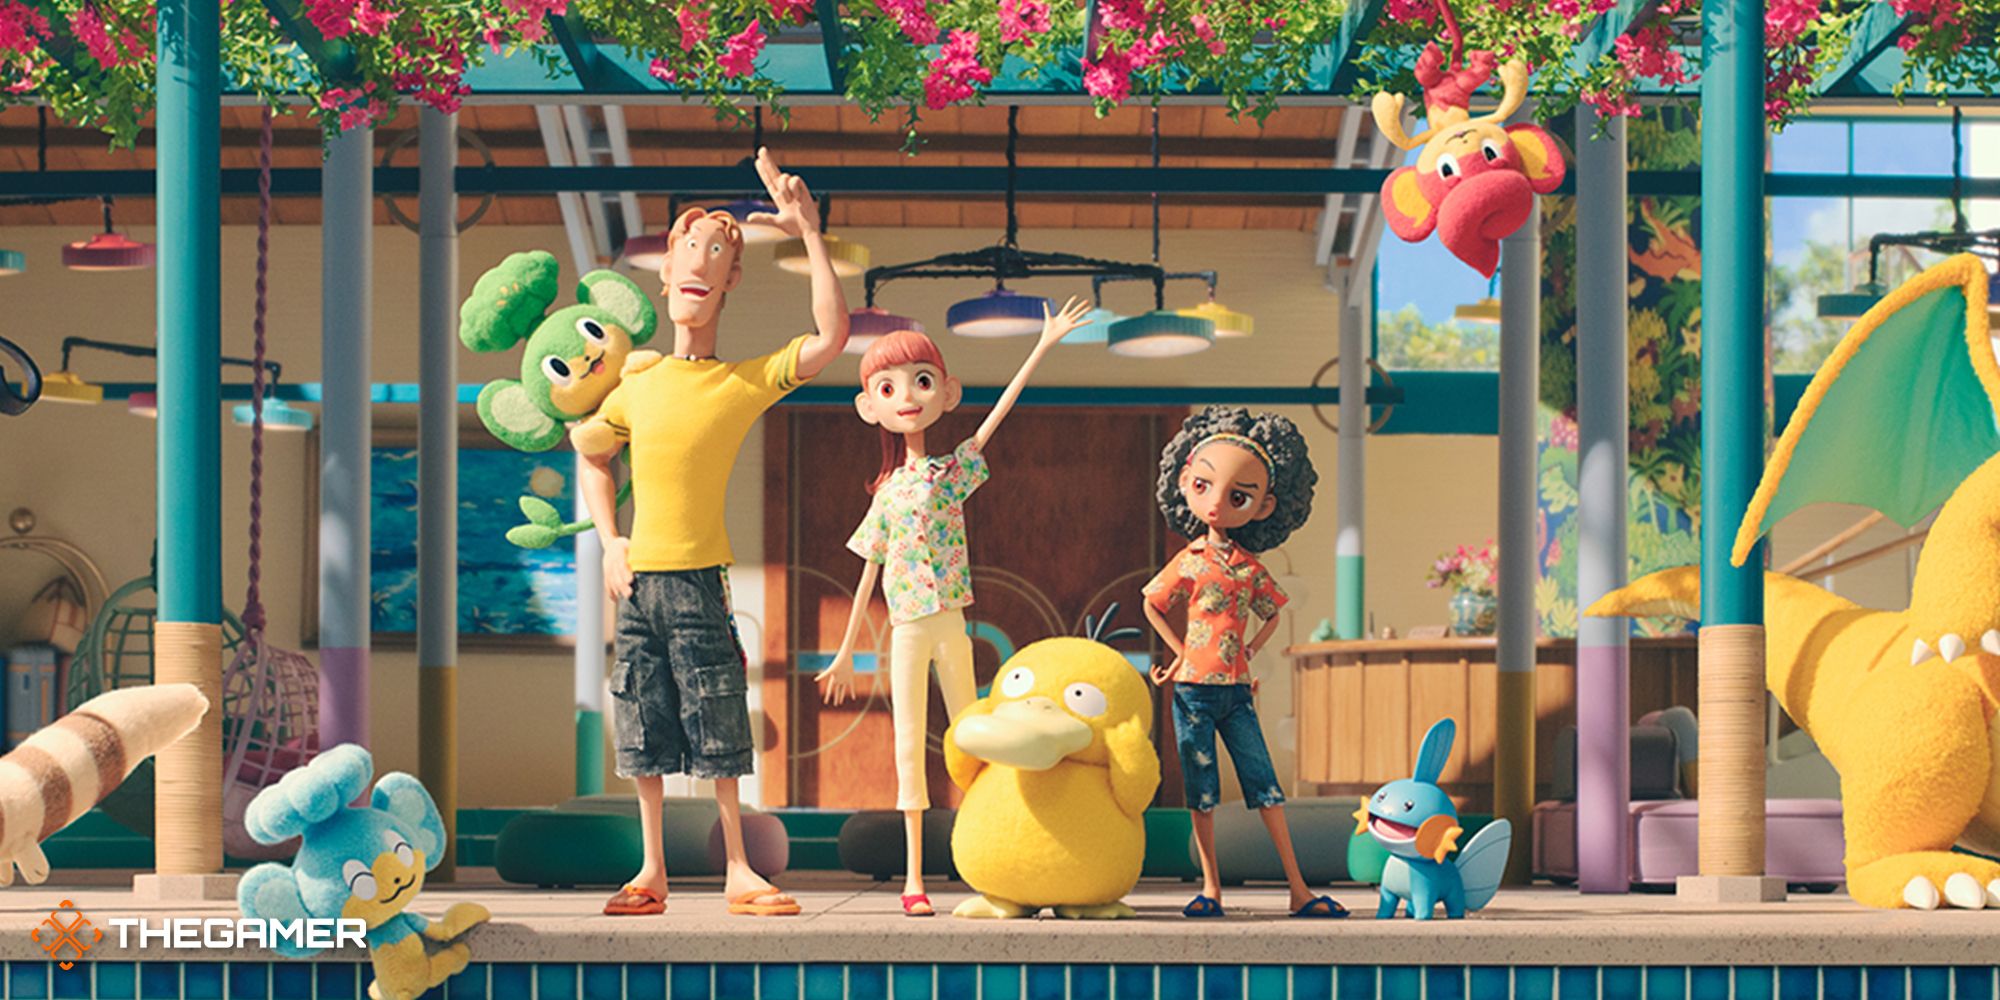 Human characters from Pokemon Concierge wave at the camera poolside while Pokemon play nerby